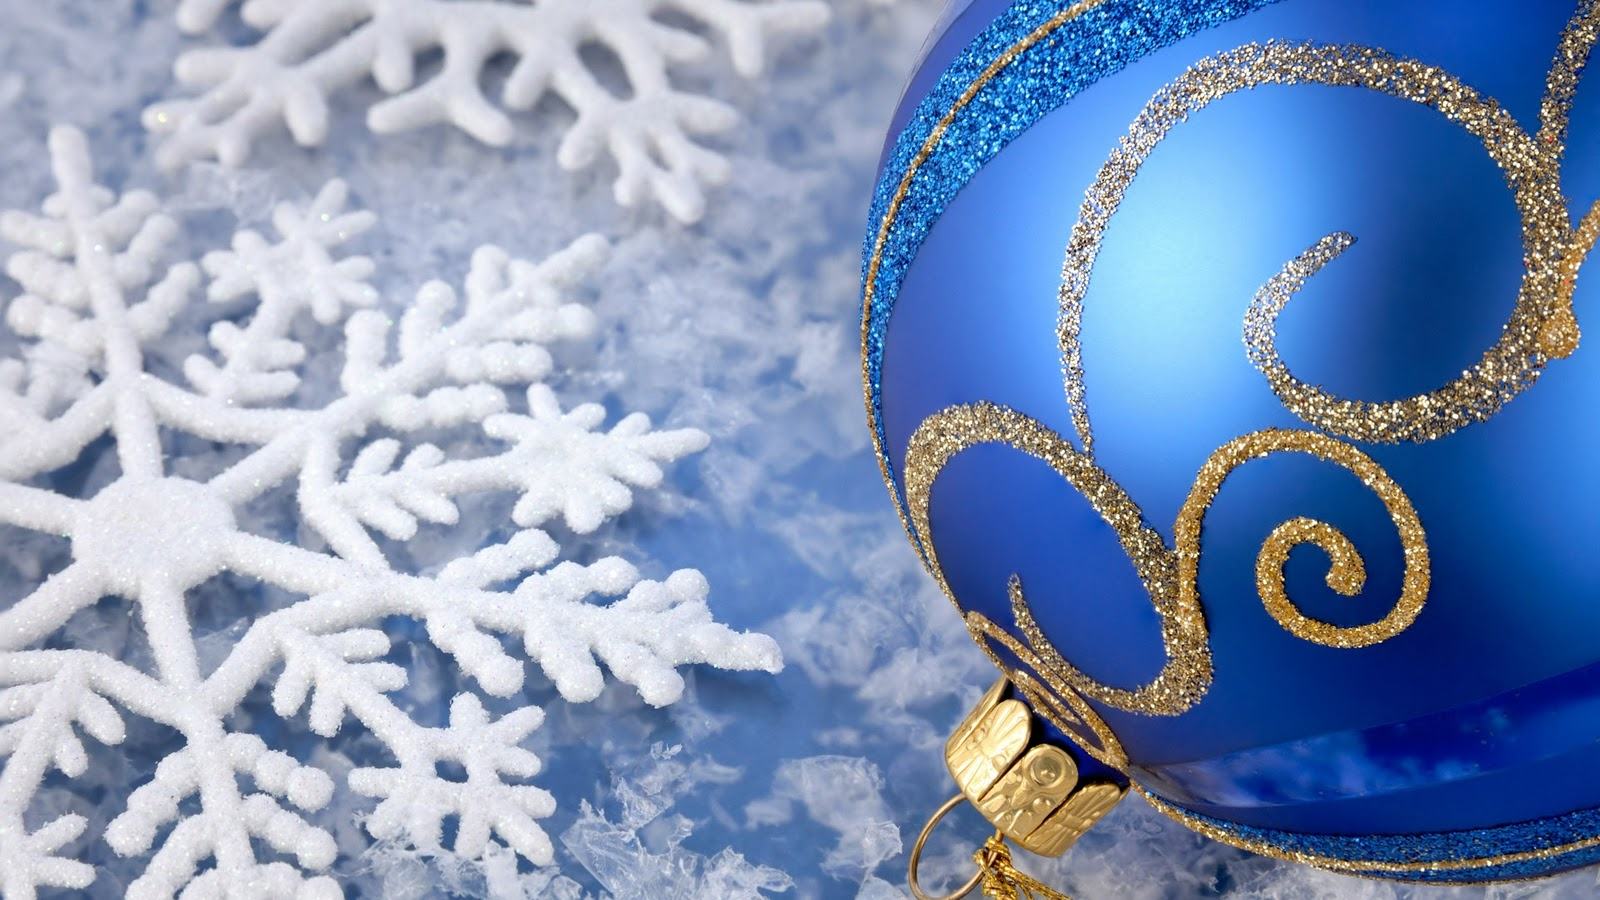 Christmas desktop background - wallpapers, images, photos, pictures |